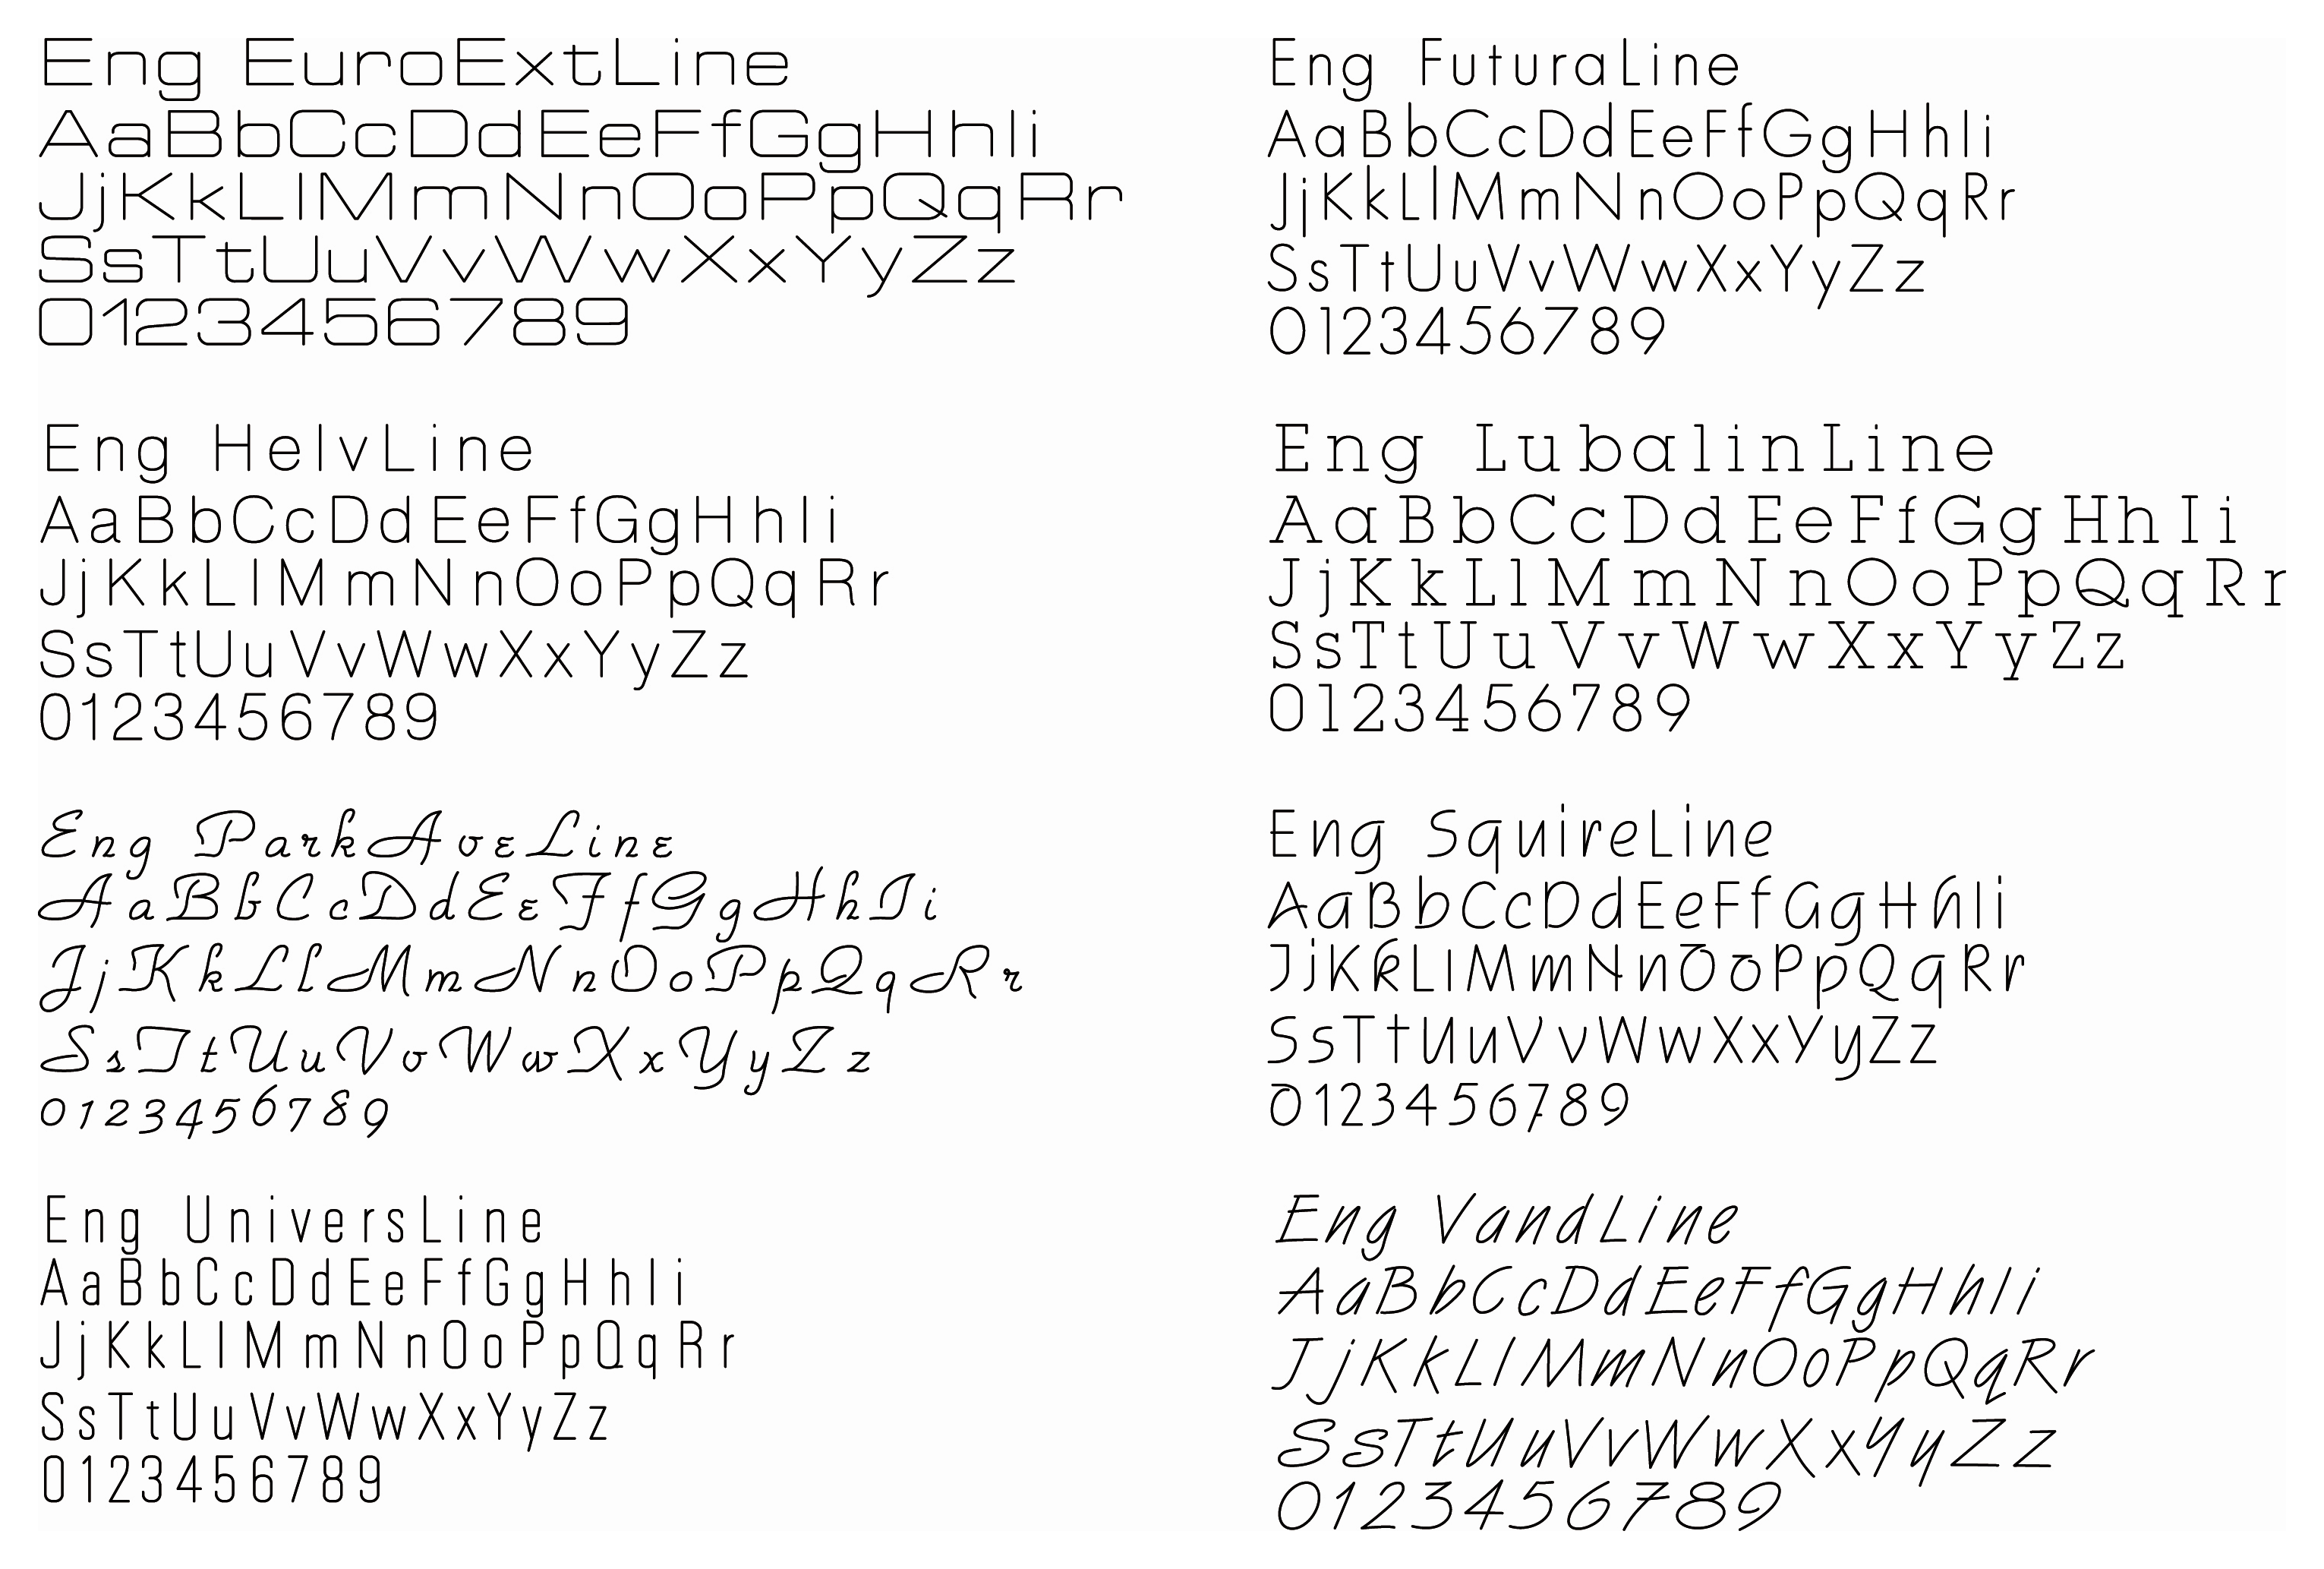 Free single line fonts for engraving